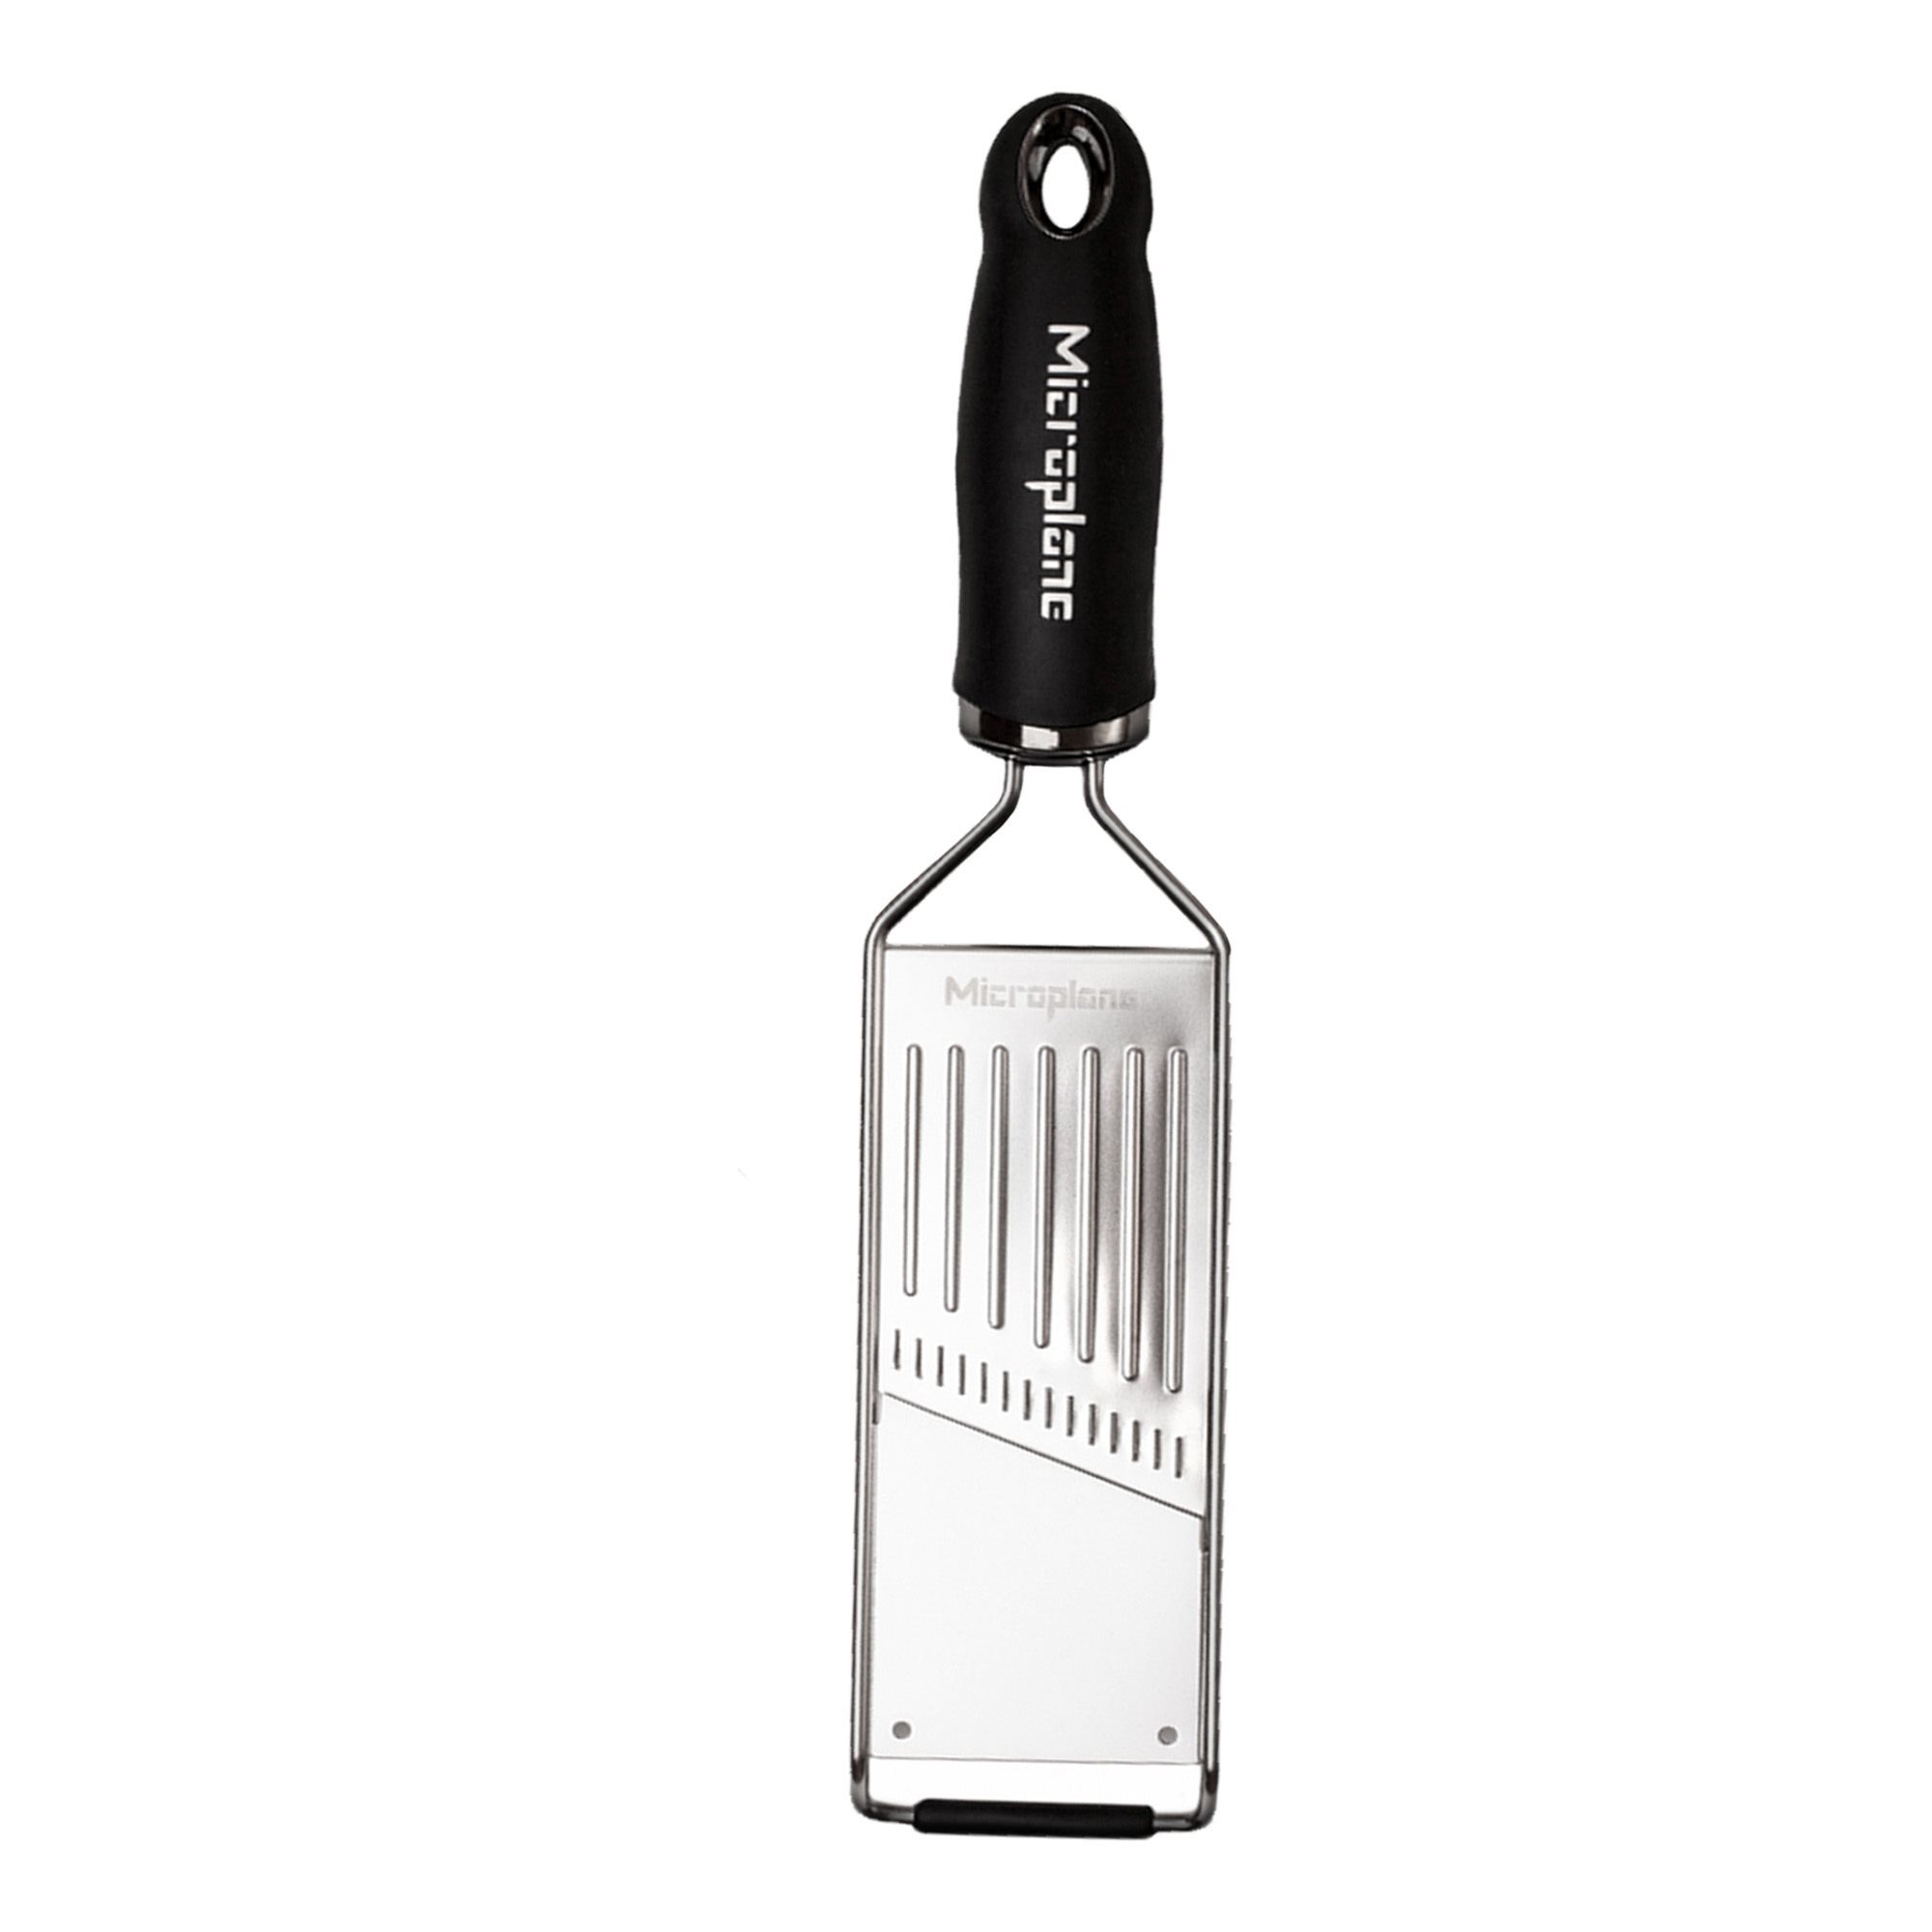 Real Cooking Miniature Stainless Steel Cheese Grater height 6.5 Cm